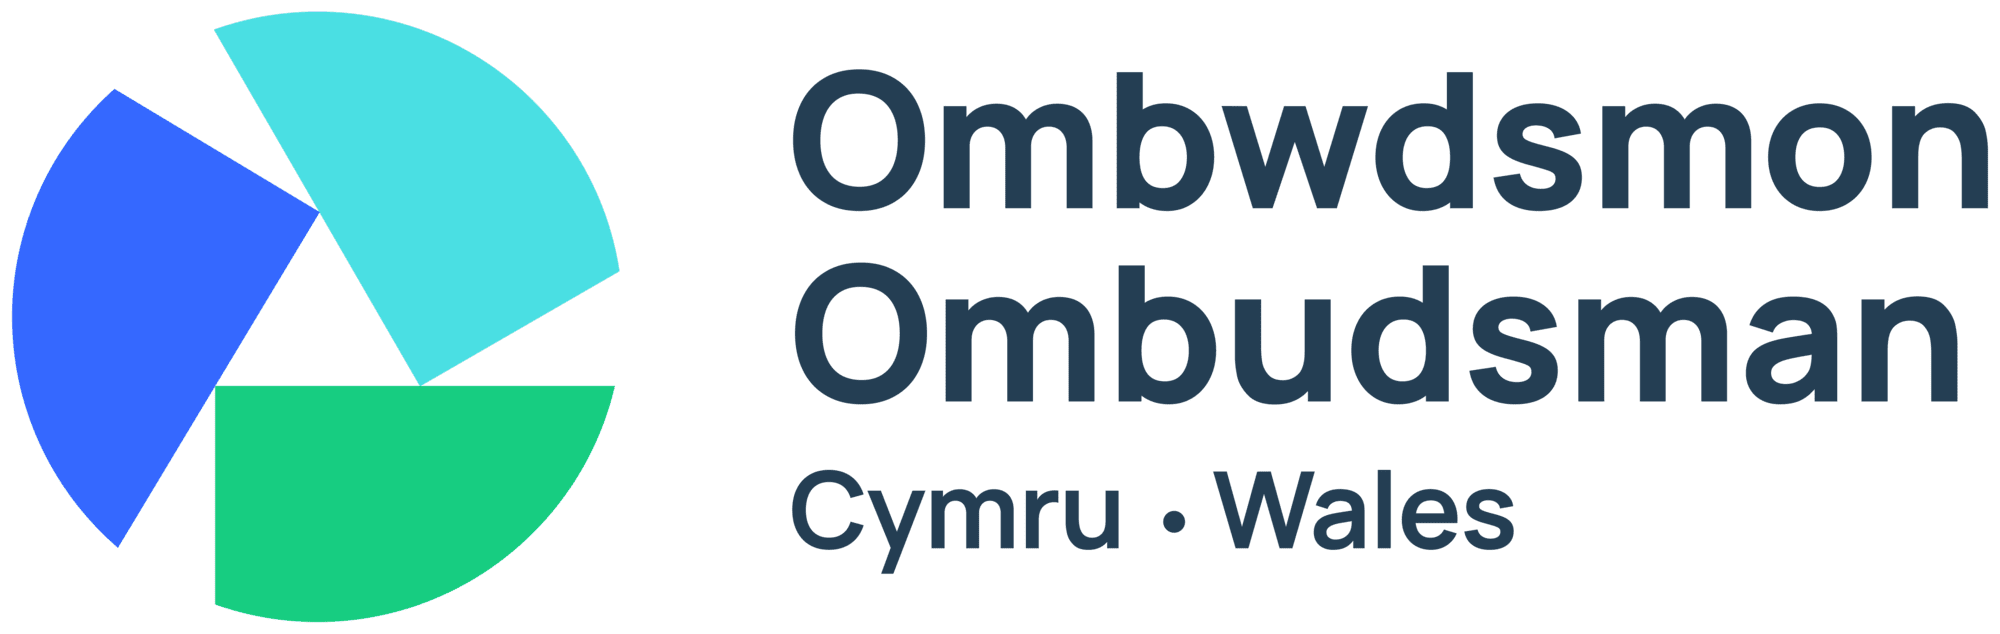 The impartiality of the Welsh Ombudsman Office called into question